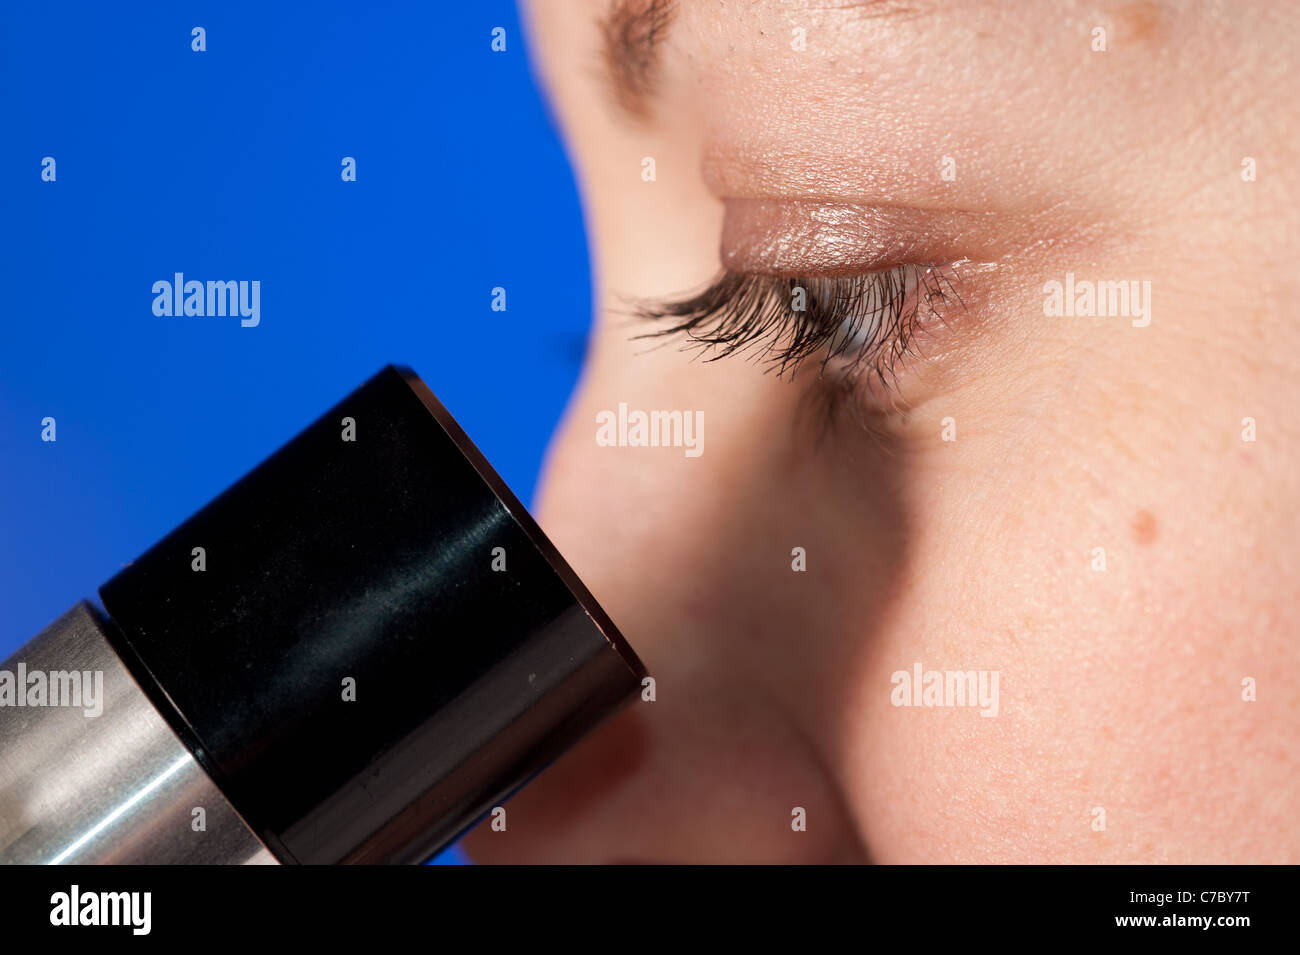 Woman's eyes looking into a microscope Stock Photo